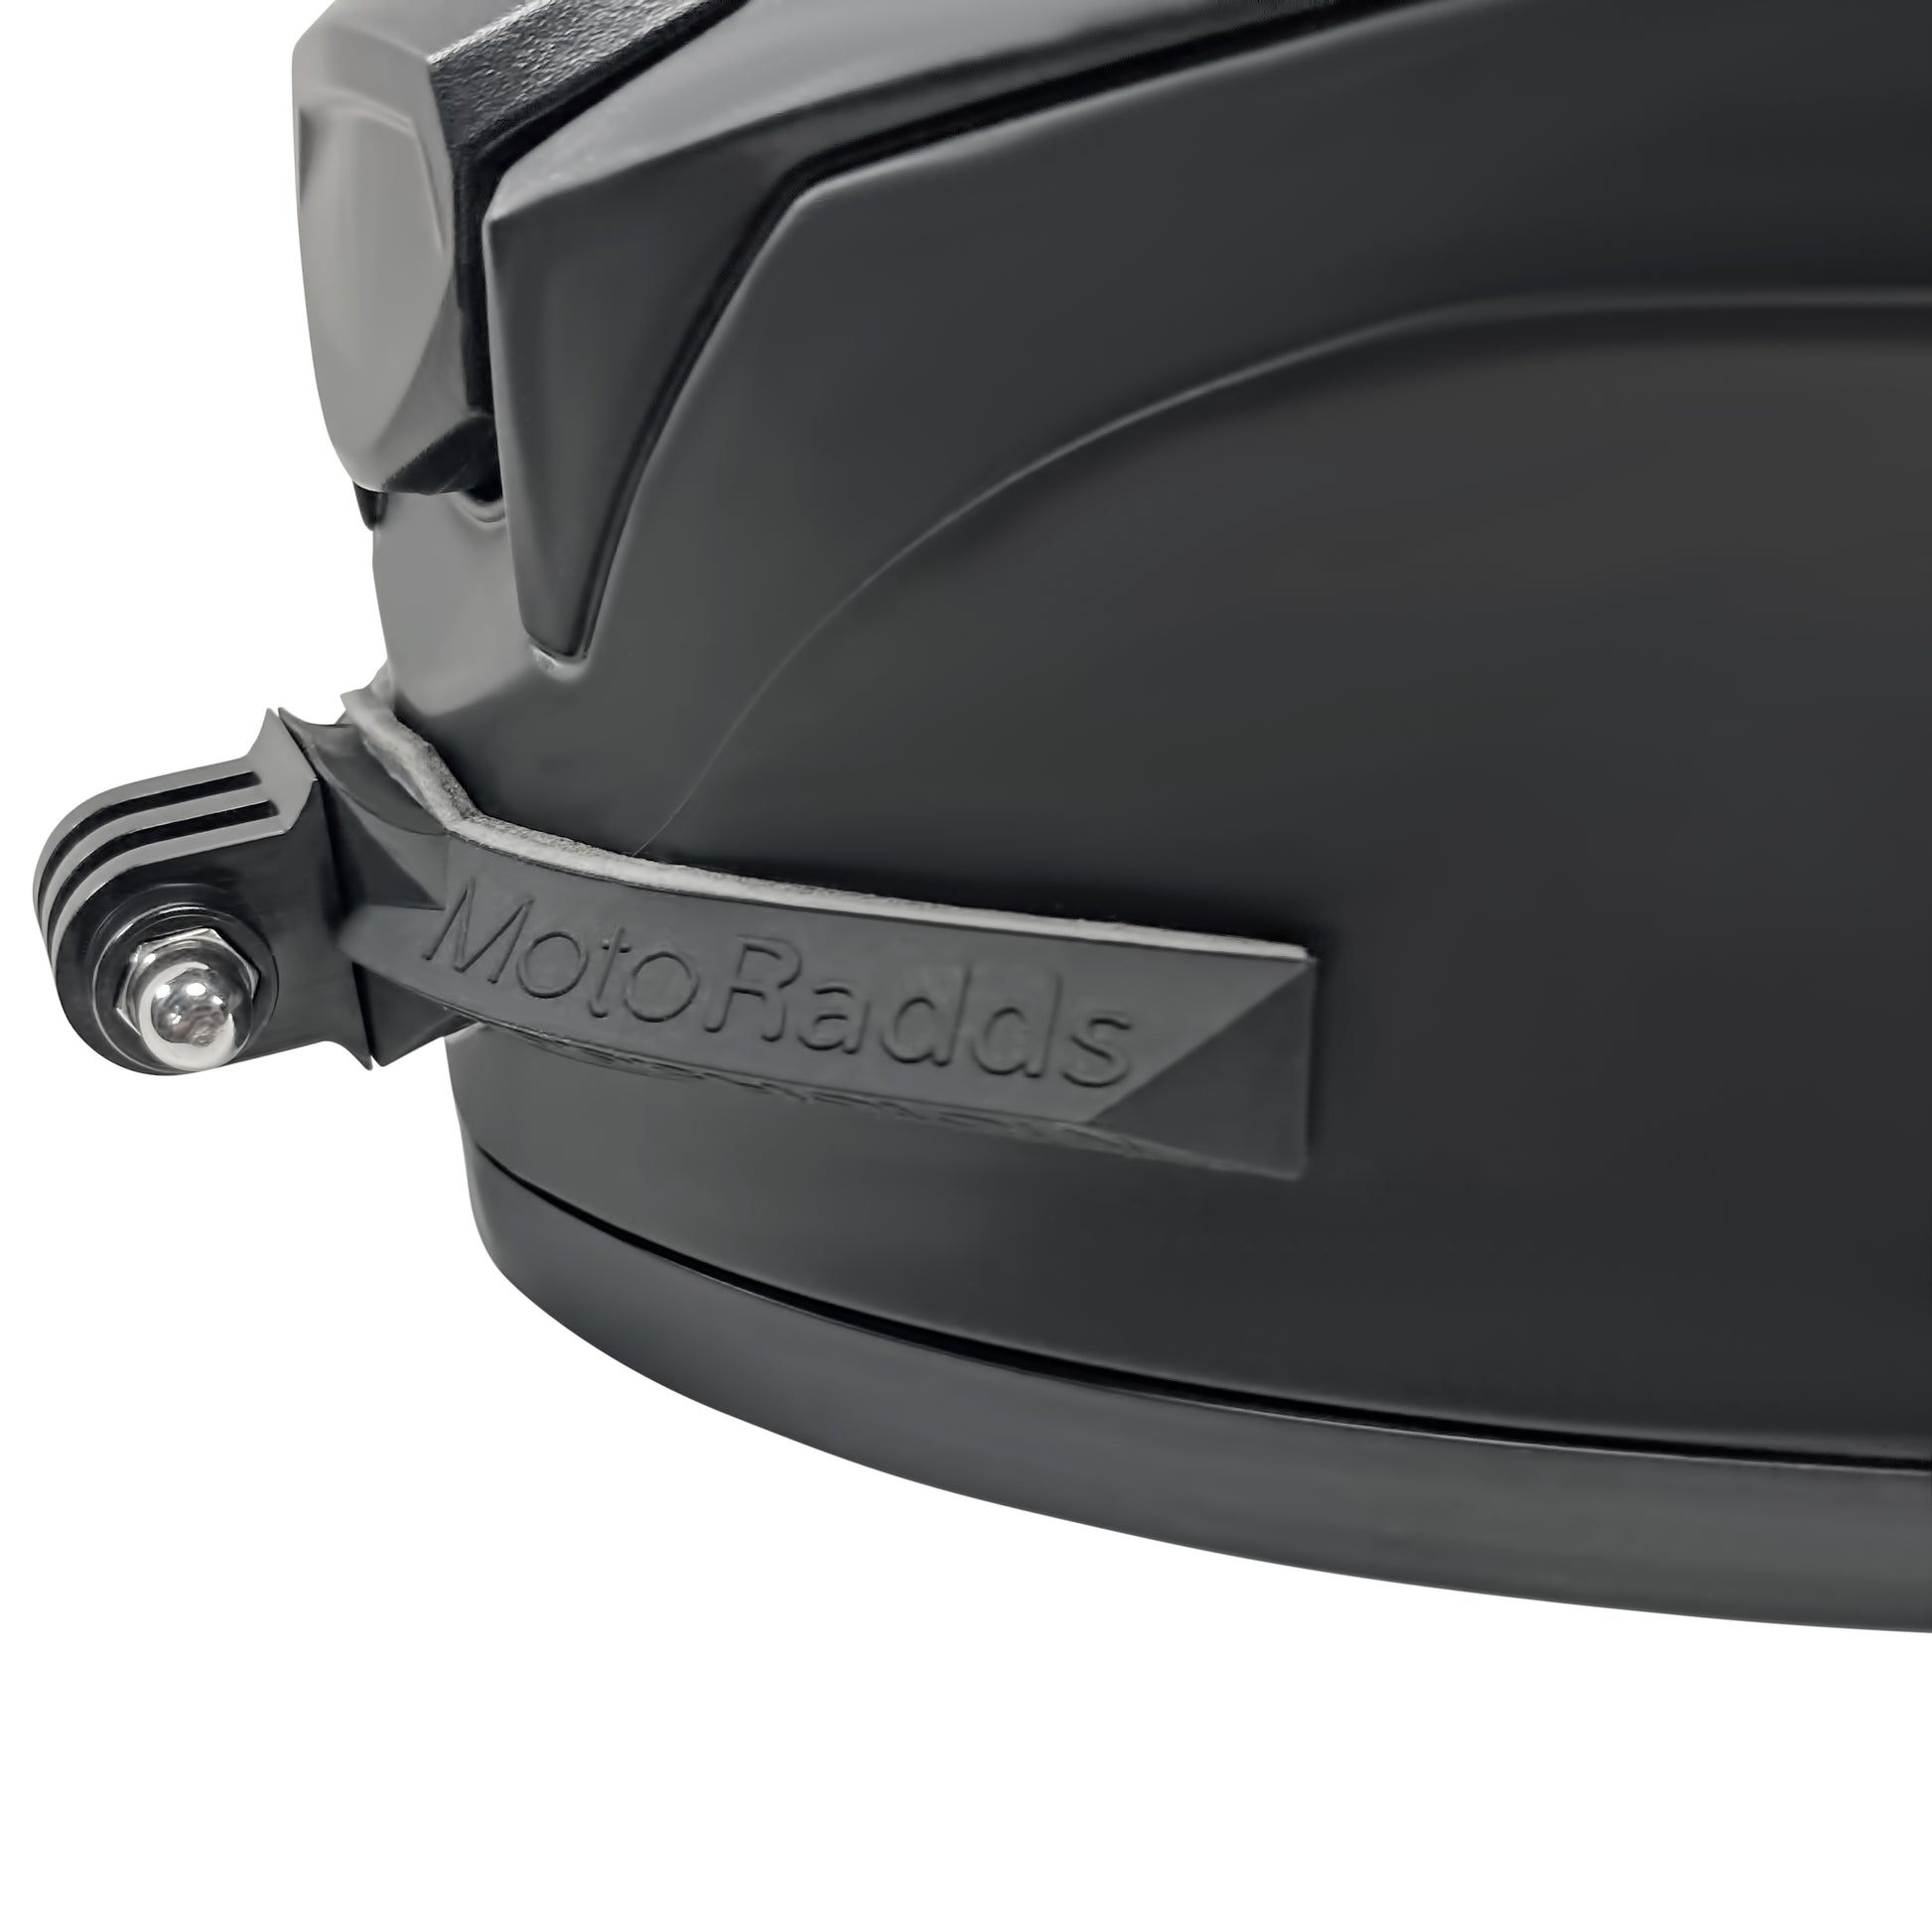 Gopro chin mount on helmet close up side view